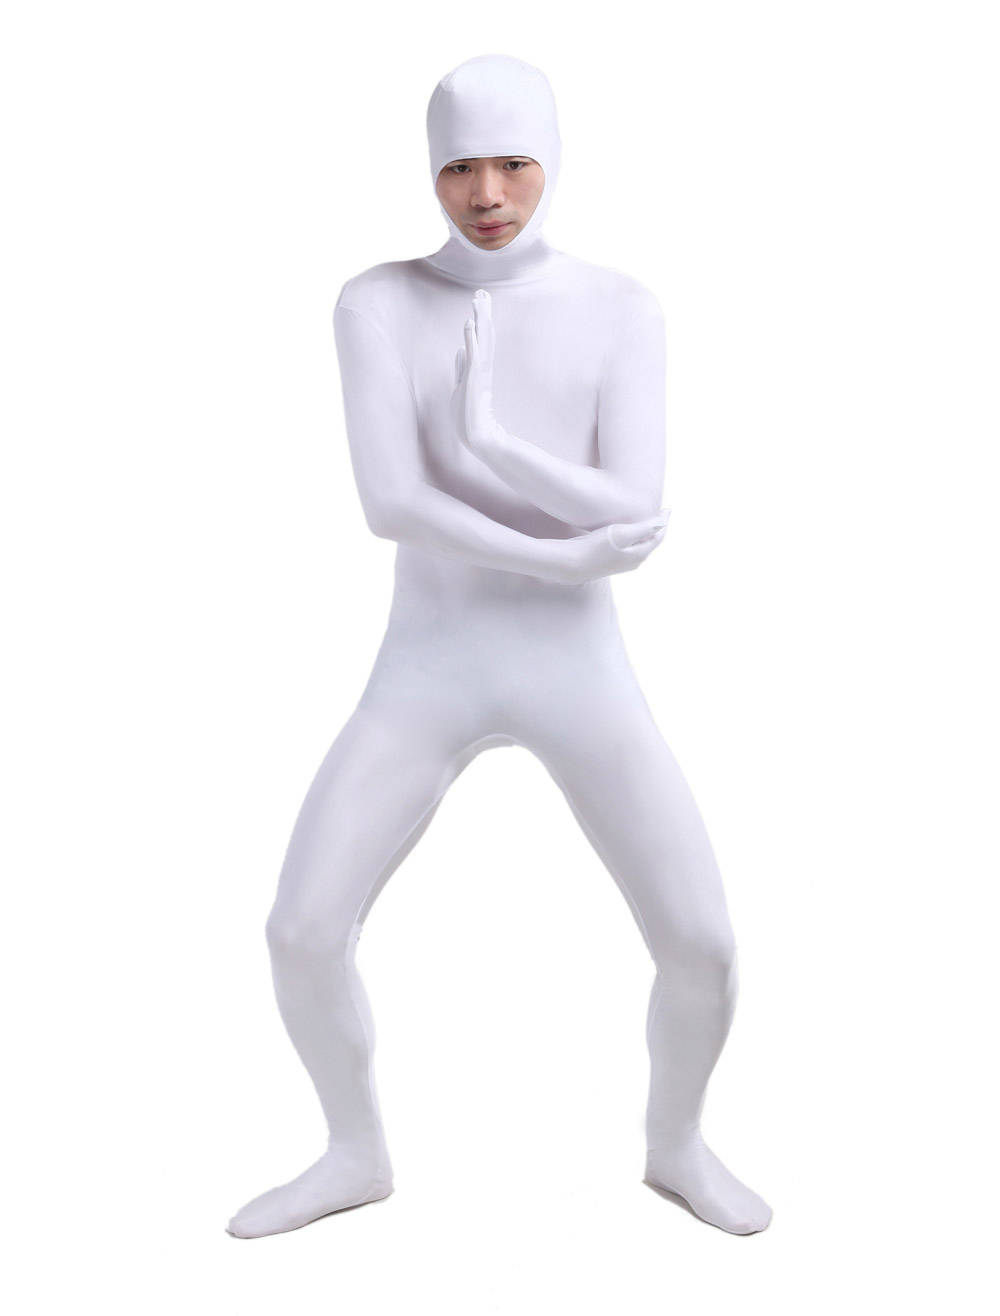 White Fur Body suit with White 8 inch Muscular body